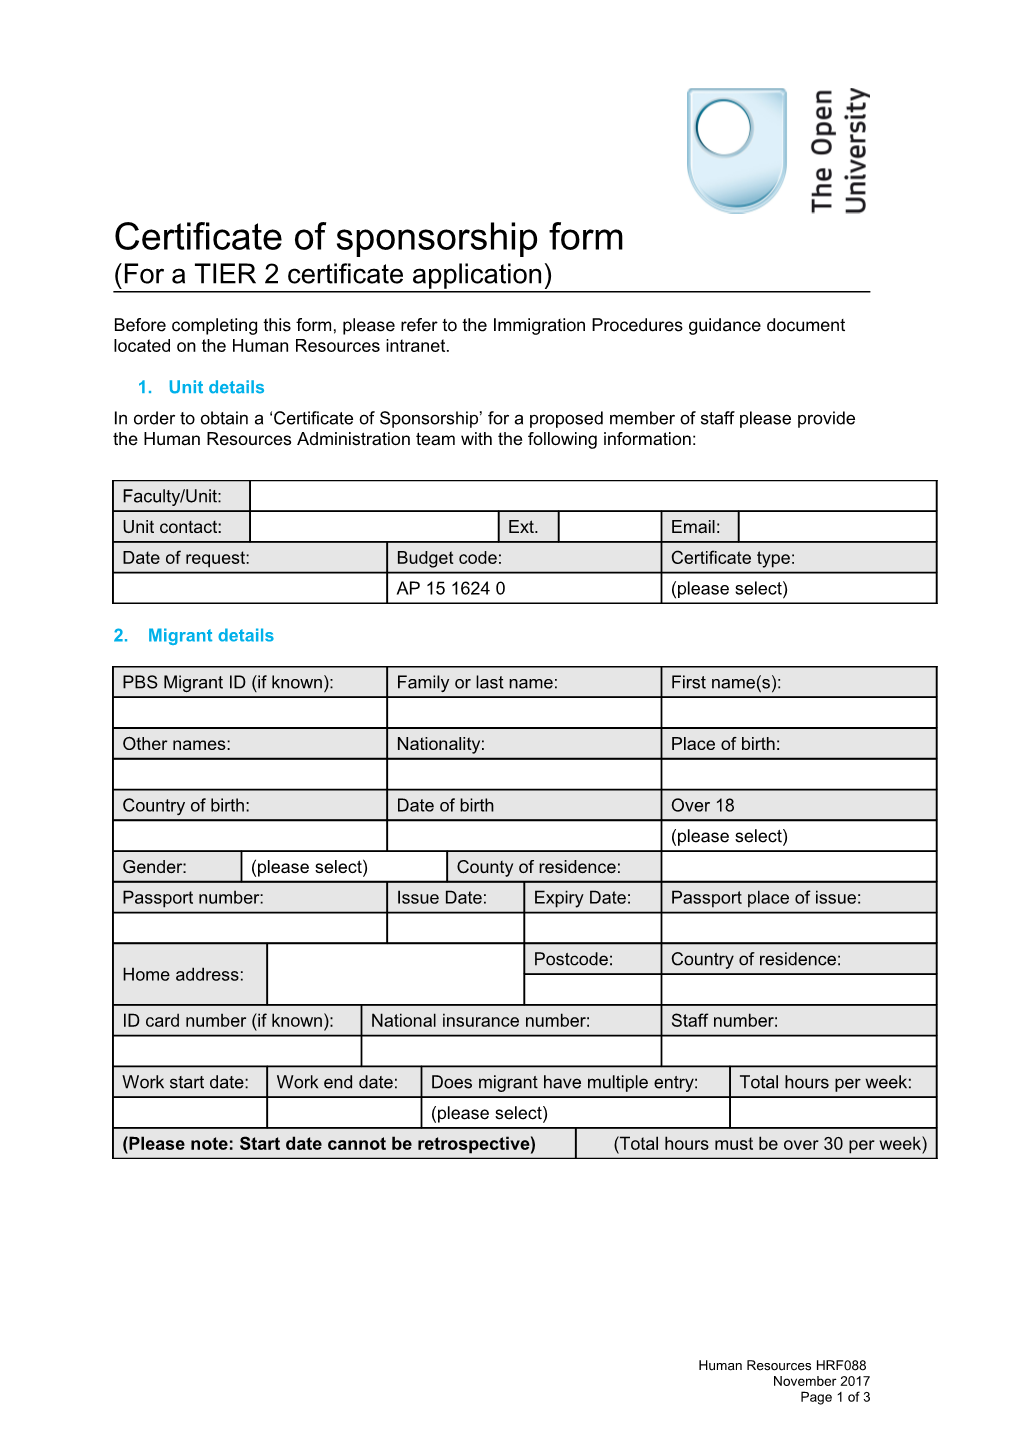 Certificate of Sponsorship Form (For a TIER 2 Certificate Application)